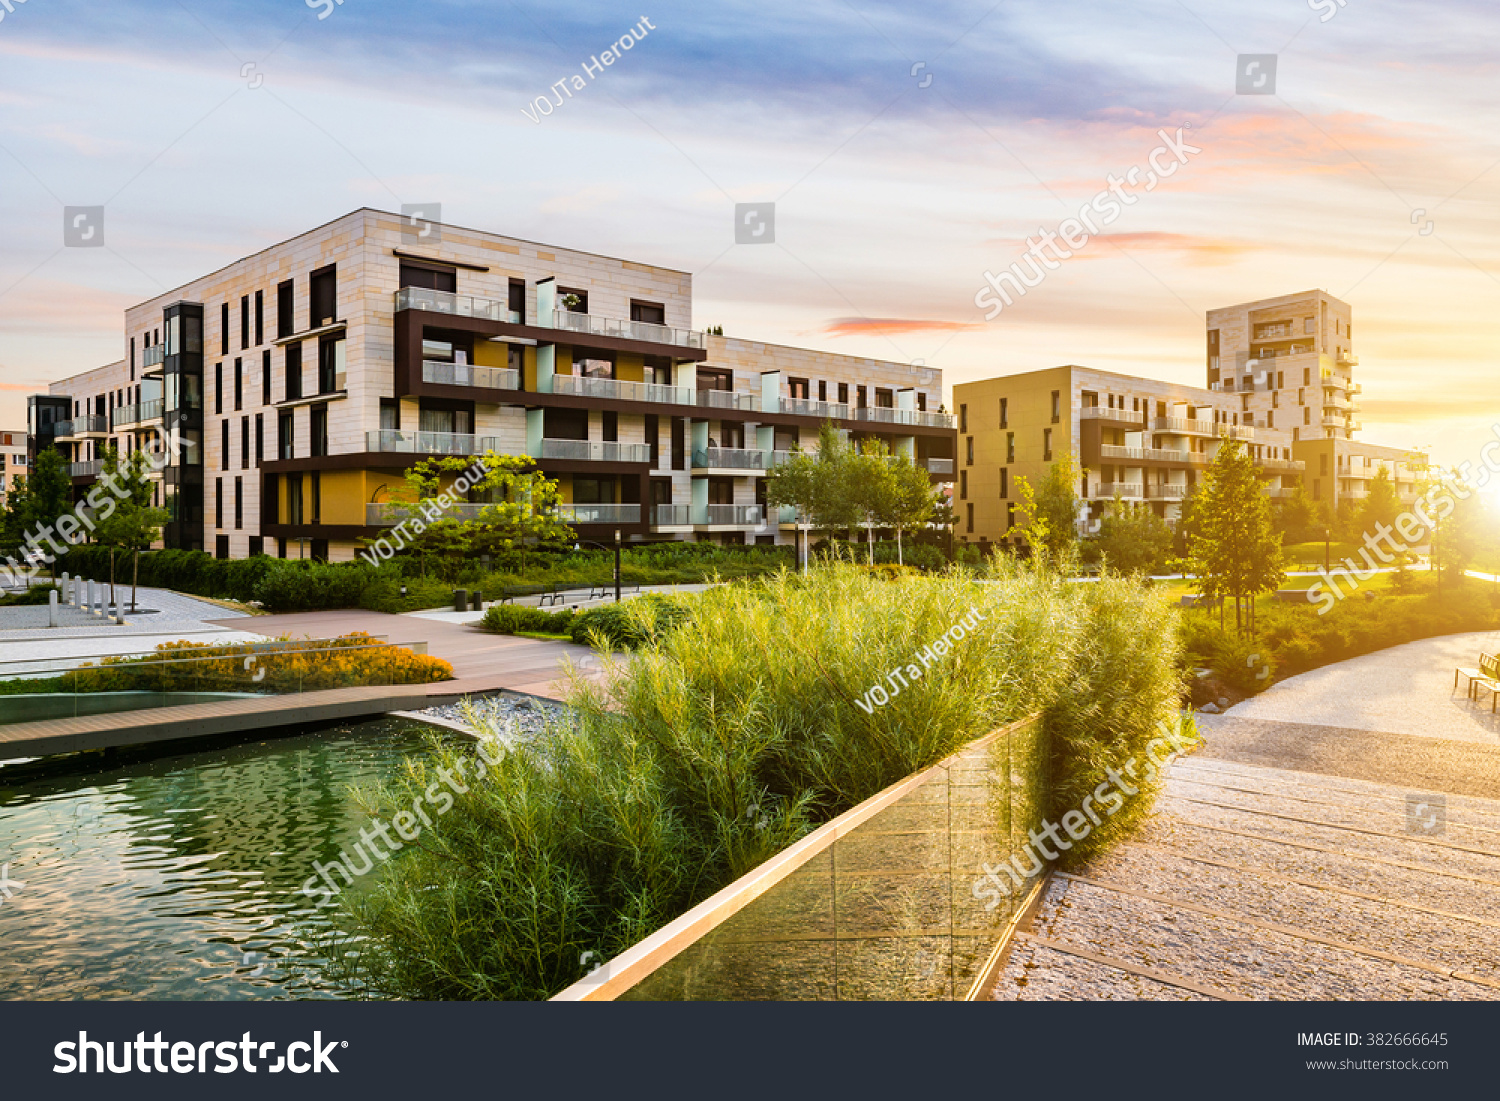 Residential building in the public green park during sunrise #382666645